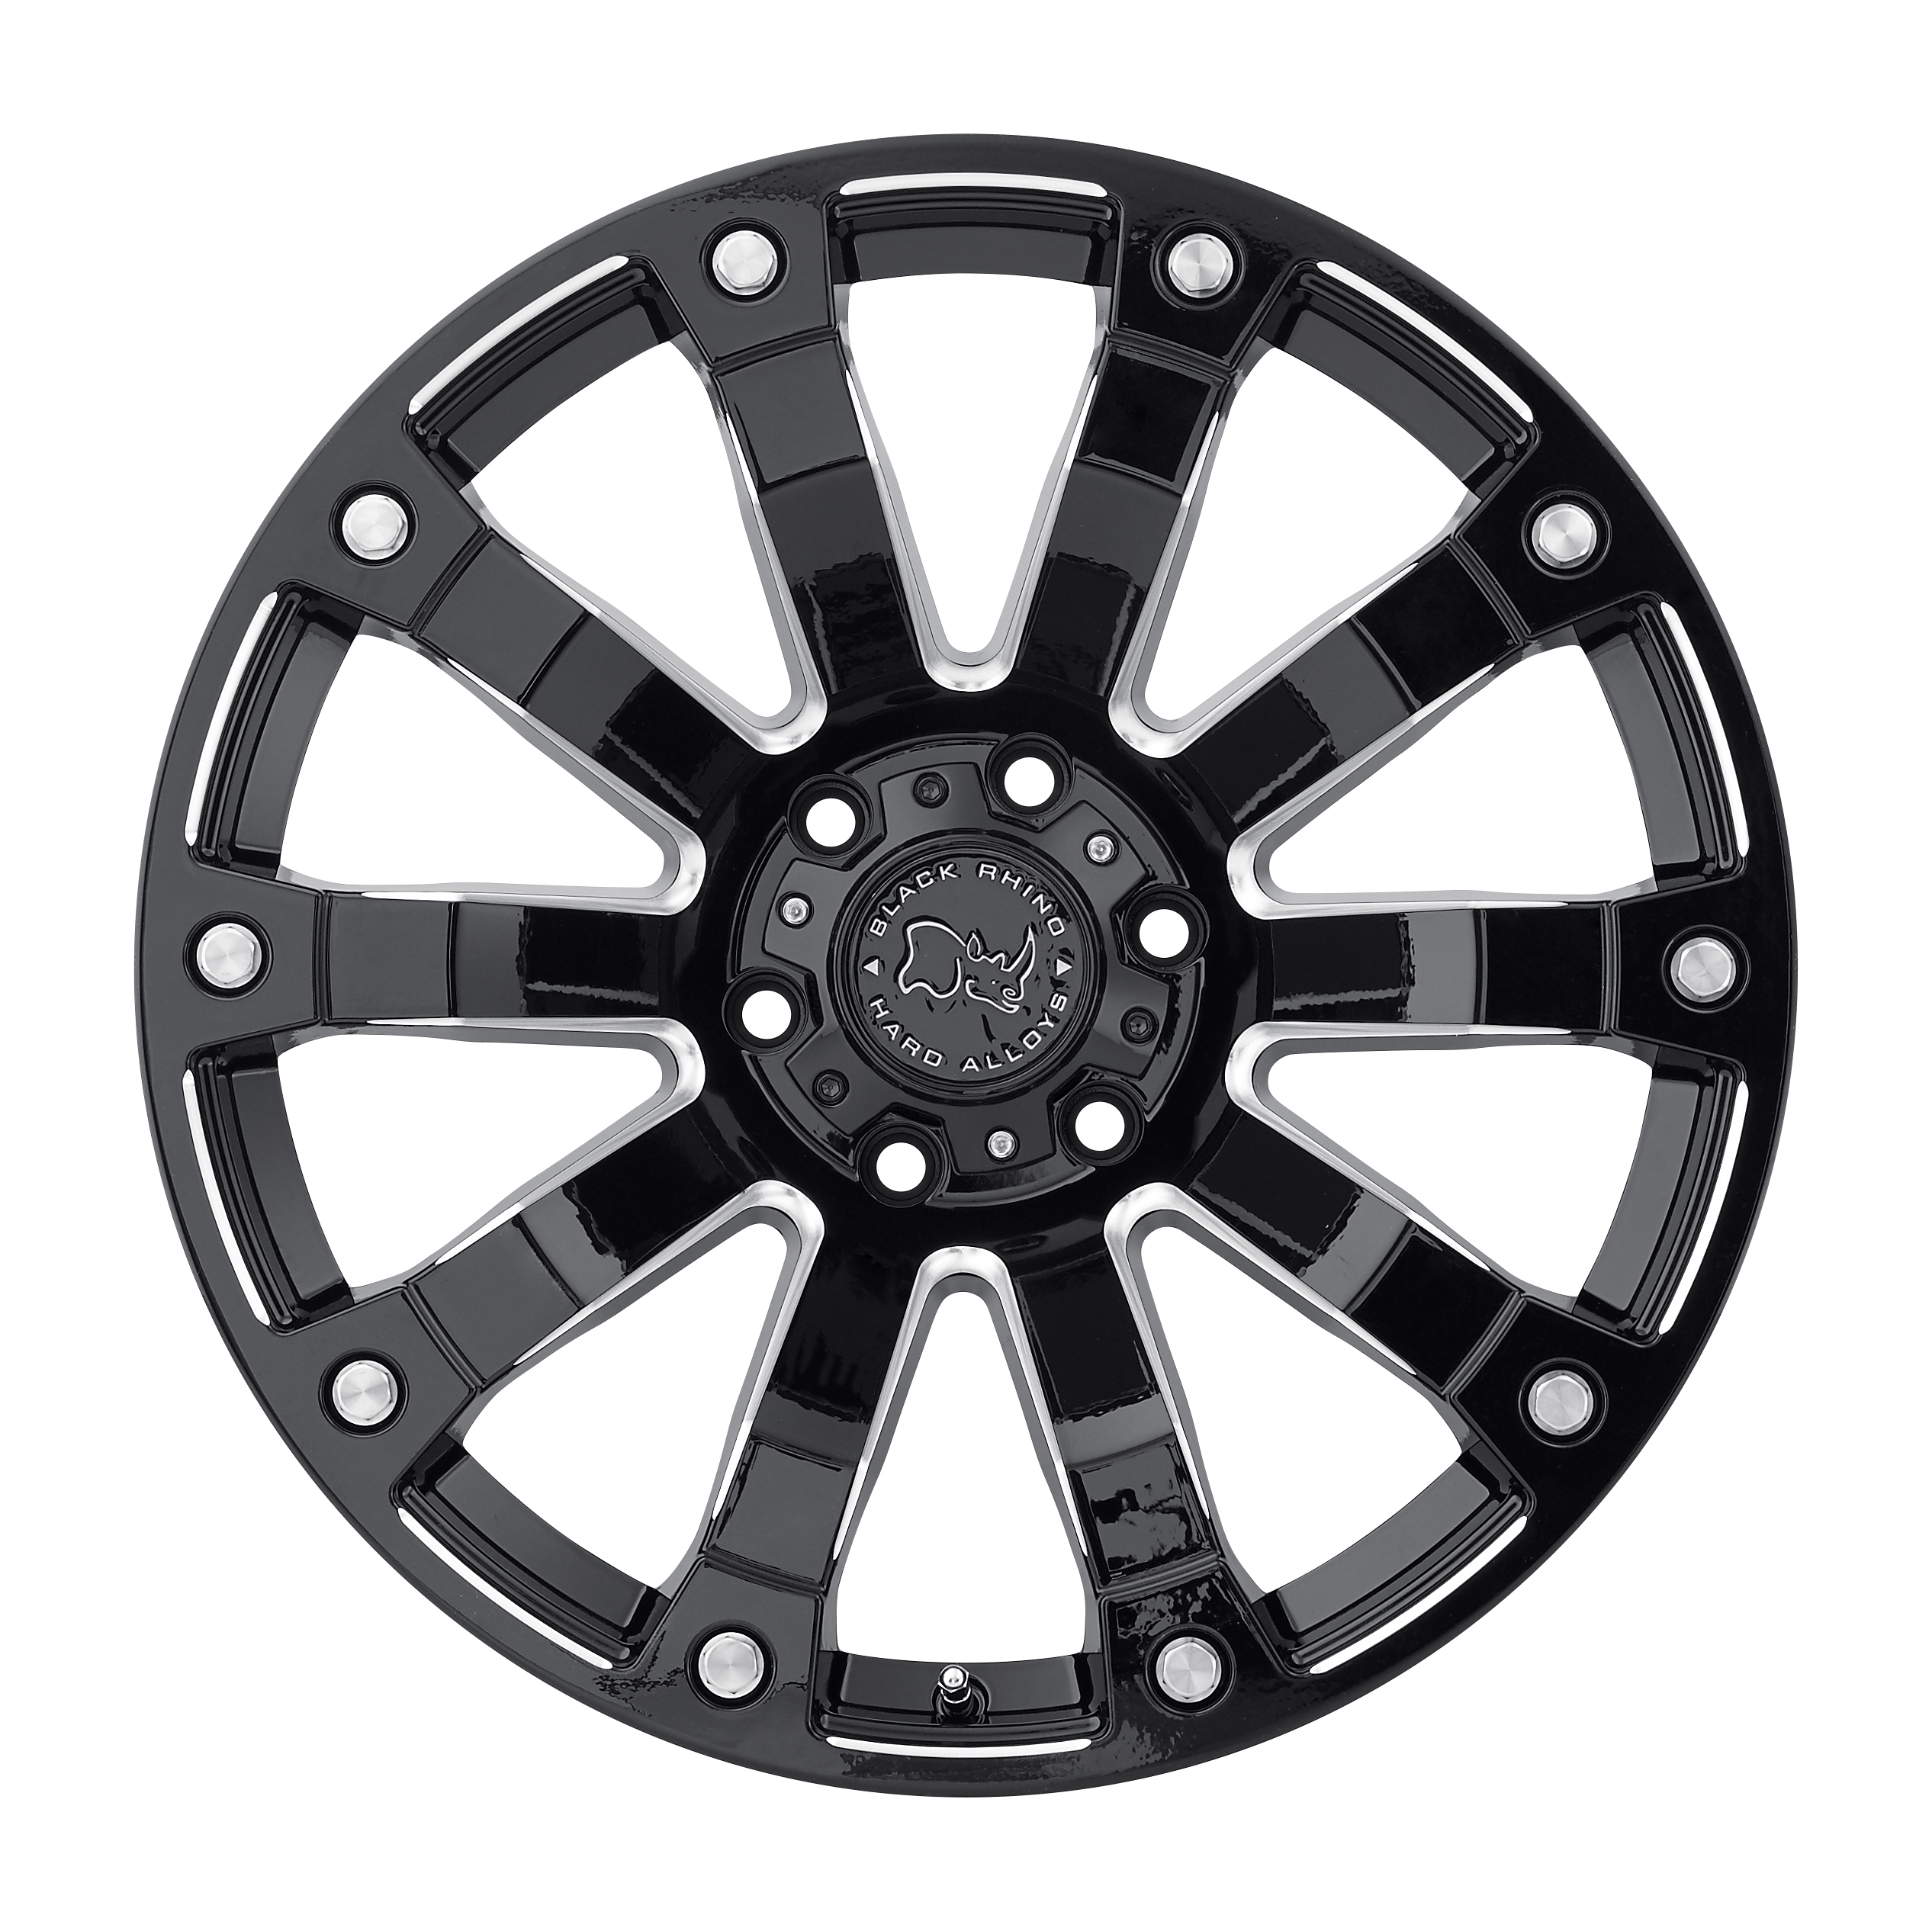 Black Rhino Truck Wheels Introduces the Selkirk in a Gloss Black Finish with Bright Milled Edge 